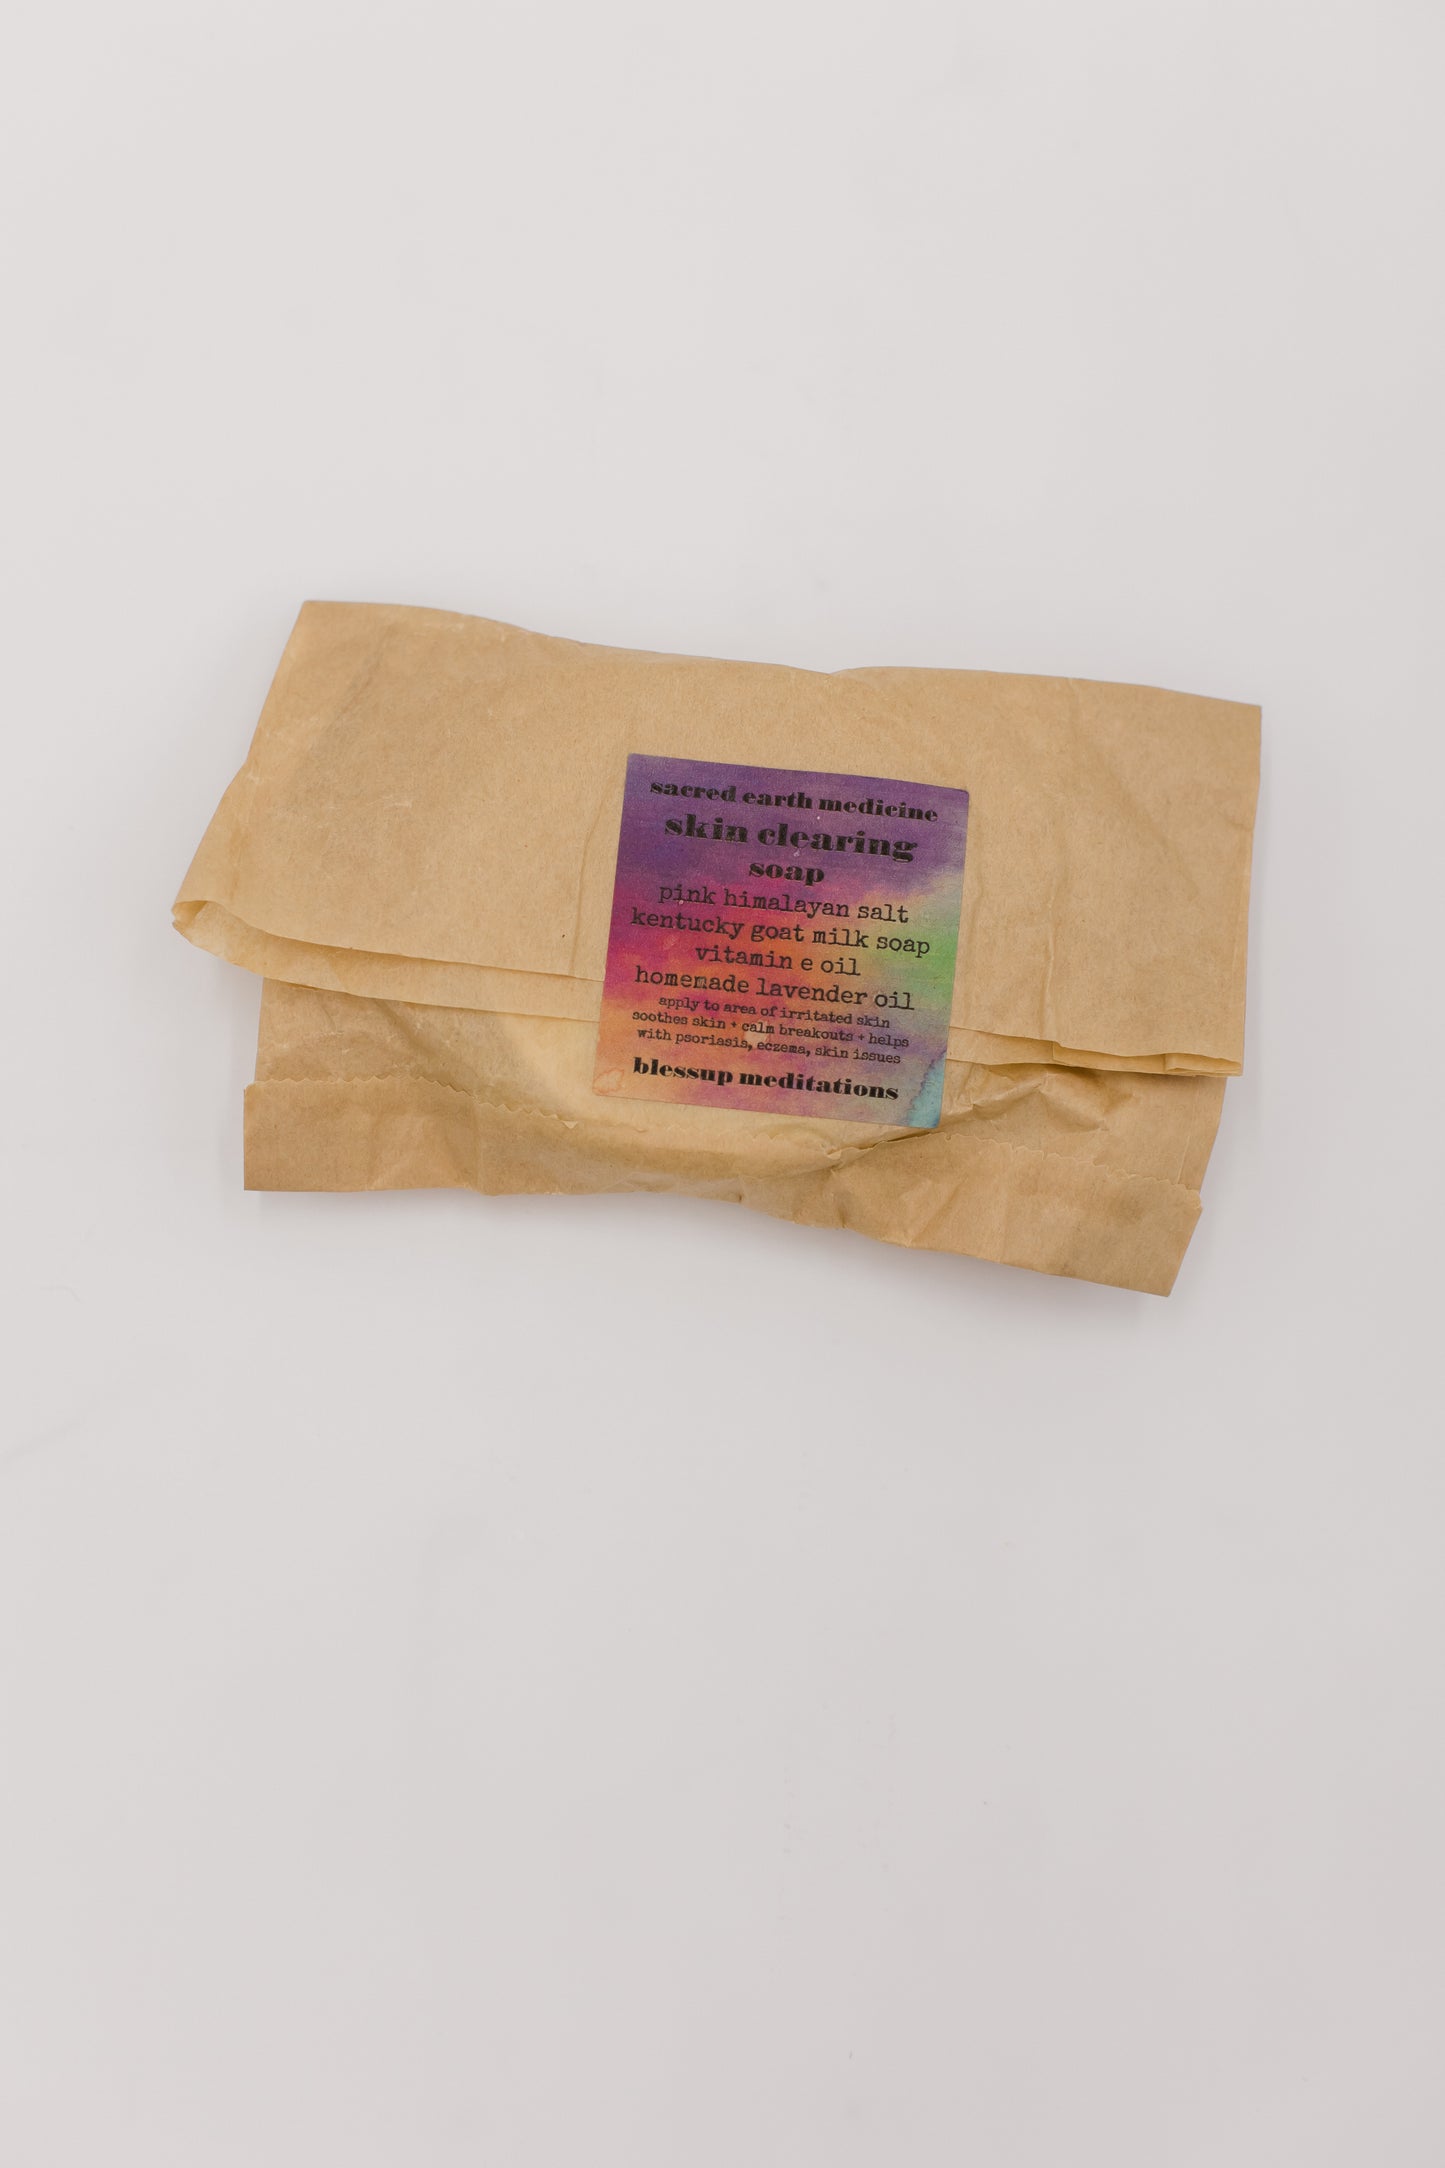 Blessup Meditations 'Skin Clearing' Soap